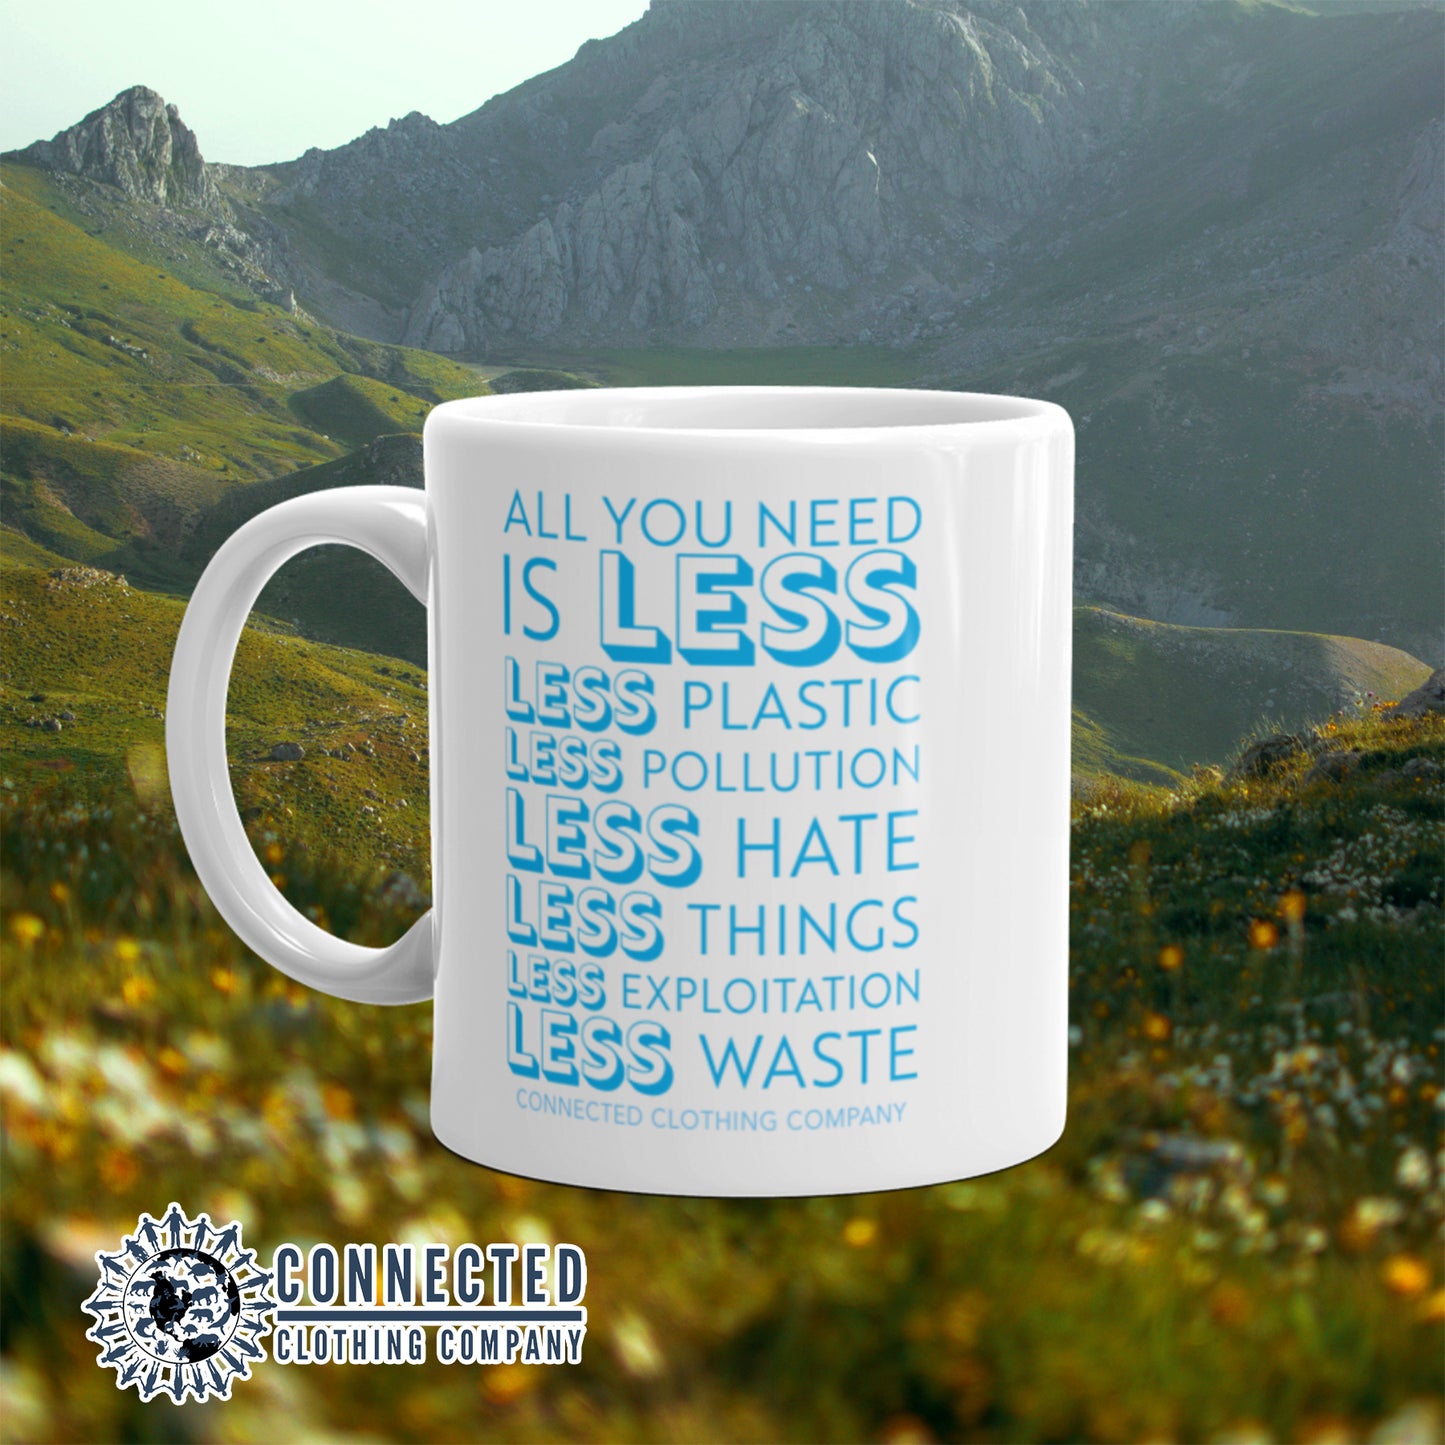 All You Need Is Less Classic Mug reads "all you need is less. less plastic. less pollution. less hate. less things. less exploitation. less waste." - sweetsherriloudesigns - Ethically and Sustainably Made - 10% of profits donated to Mission Blue ocean conservation